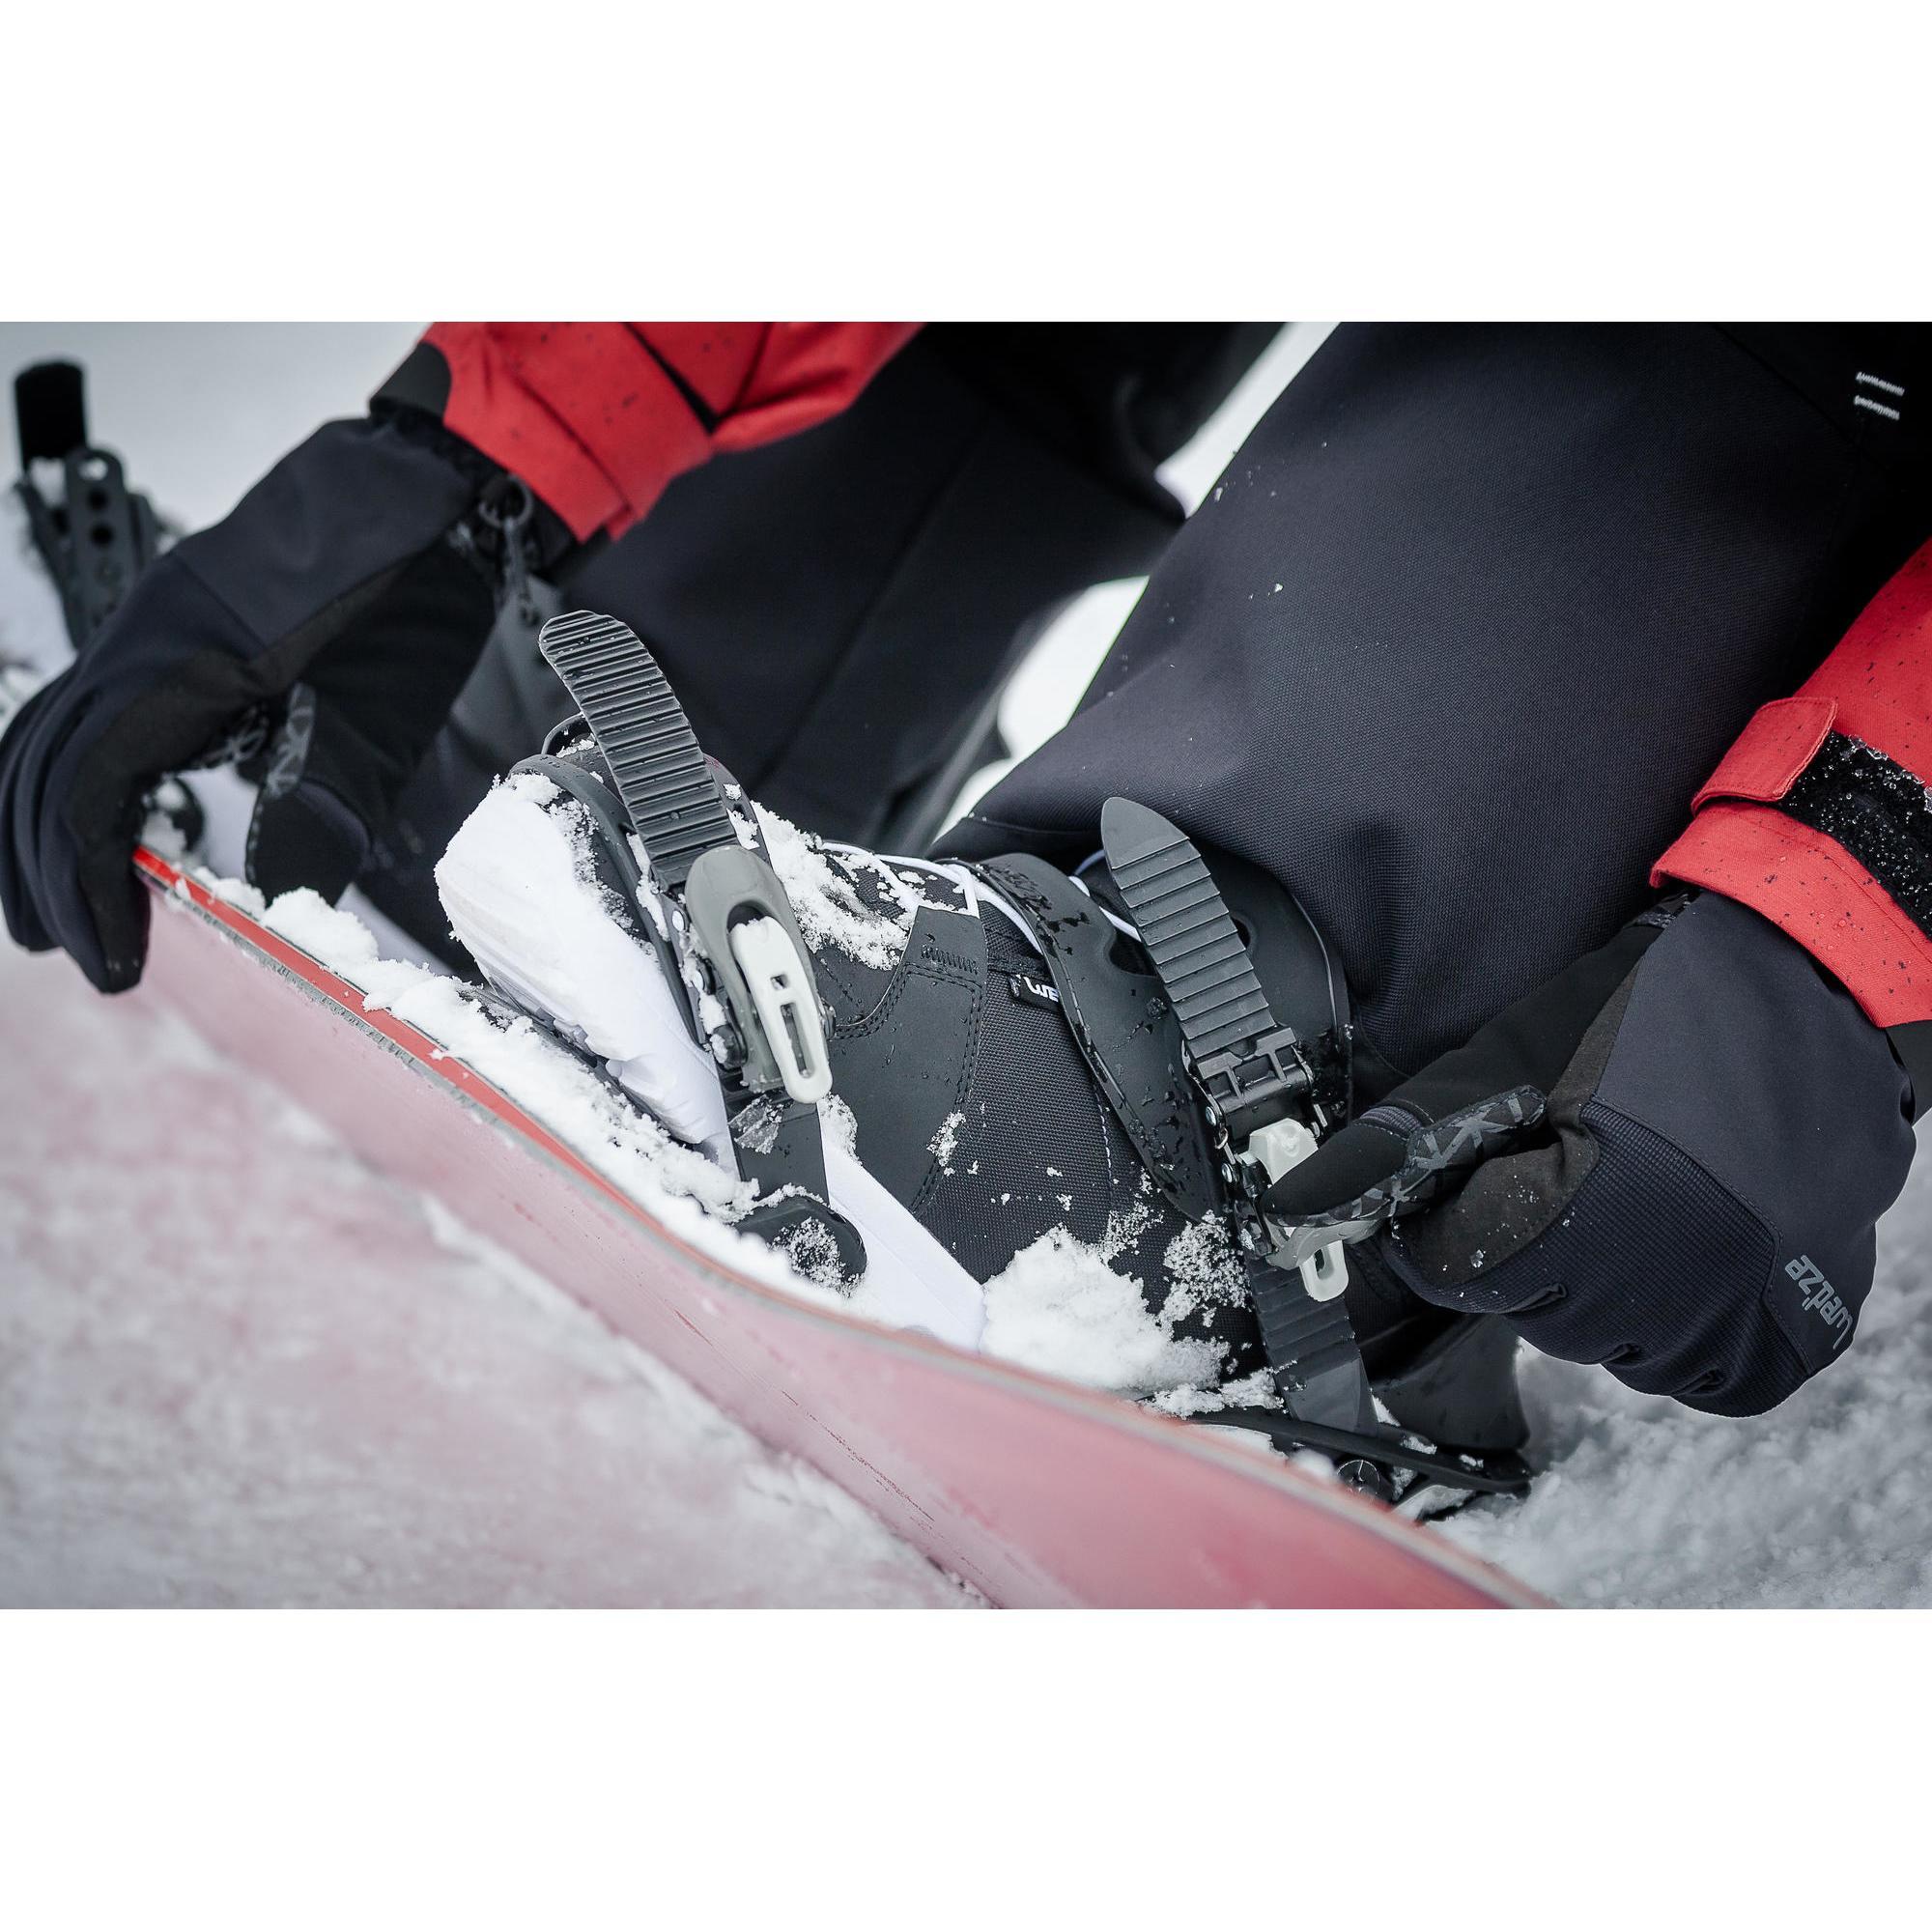 snowshoeing in snowboard boots